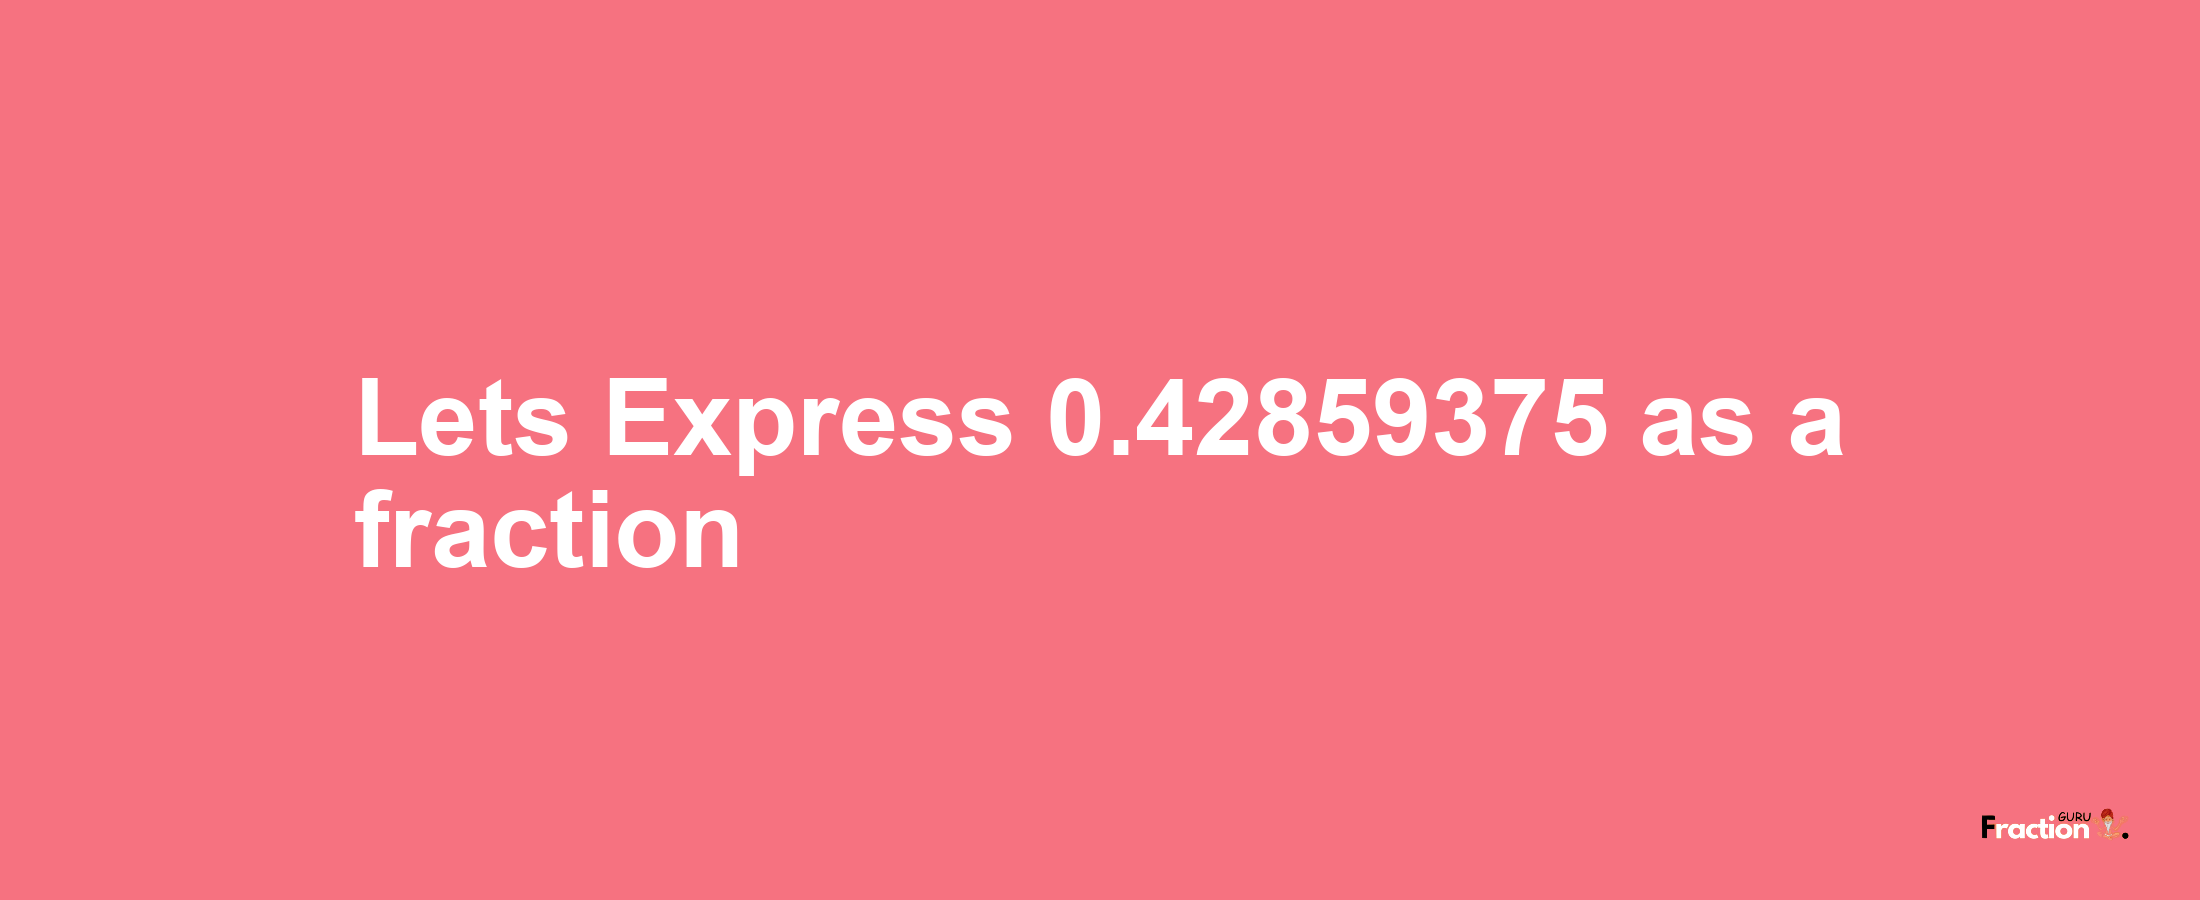 Lets Express 0.42859375 as afraction